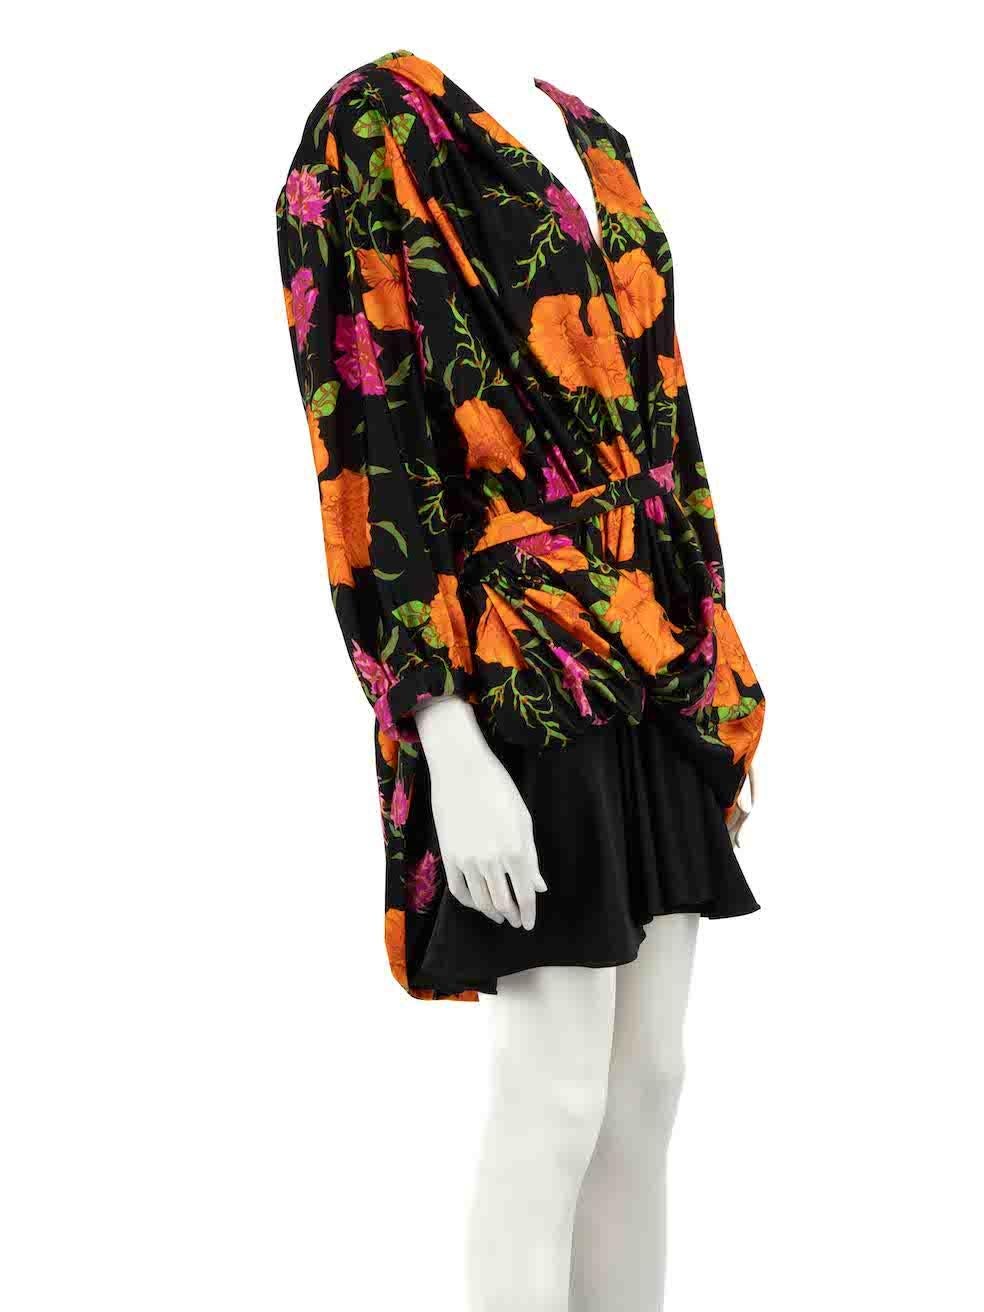 CONDITION is Never worn, with tags. No visible wear to dress is evident on this new Balenciaga designer resale item.
 
 
 
 Details
 
 
 Multicolour
 
 Synthetic
 
 Dress
 
 Flora pattern
 
 V-neck
 
 Long sleeves
 
 Padded shoulders
 
 Back zip and